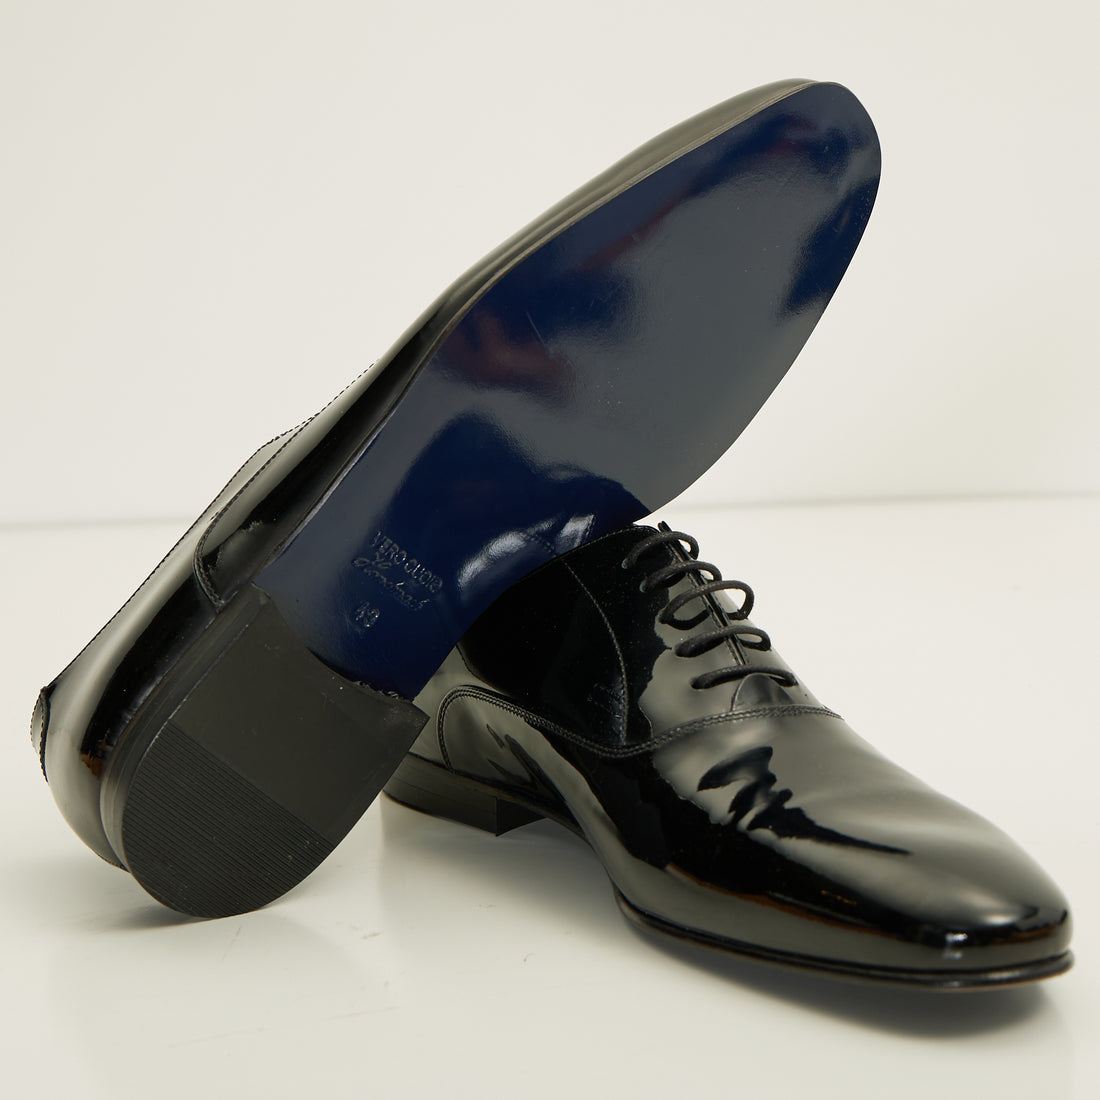 Patent Leather Oxfords - Black